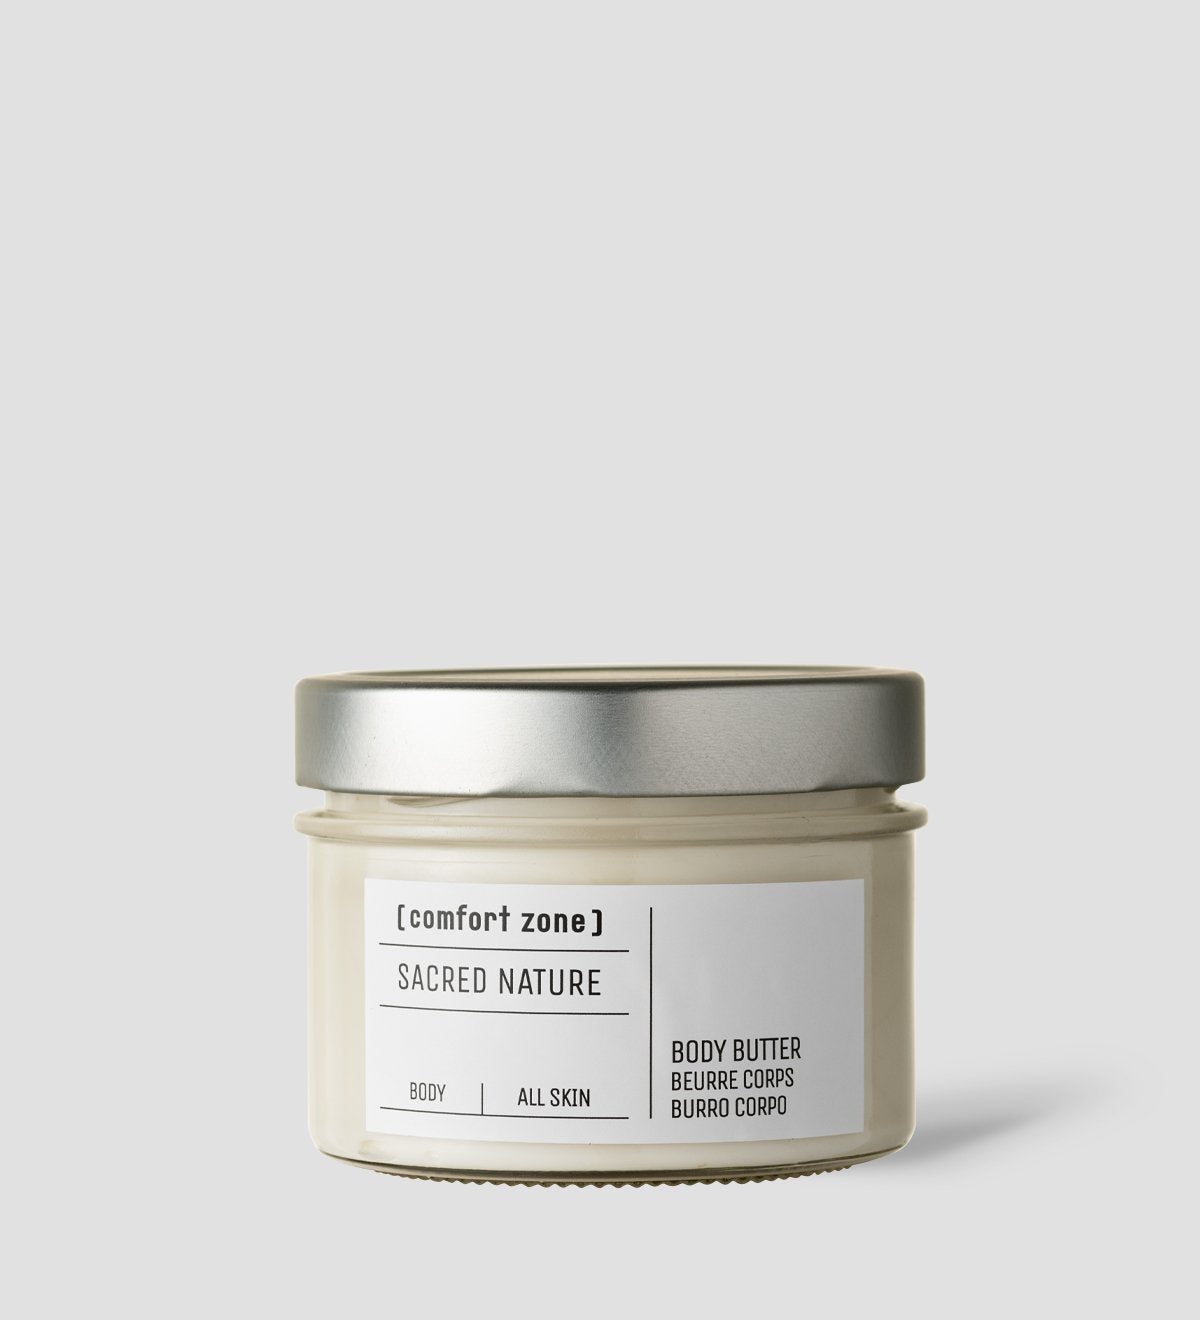 Sacred Nature Body Butter 220ml Comfort Zone